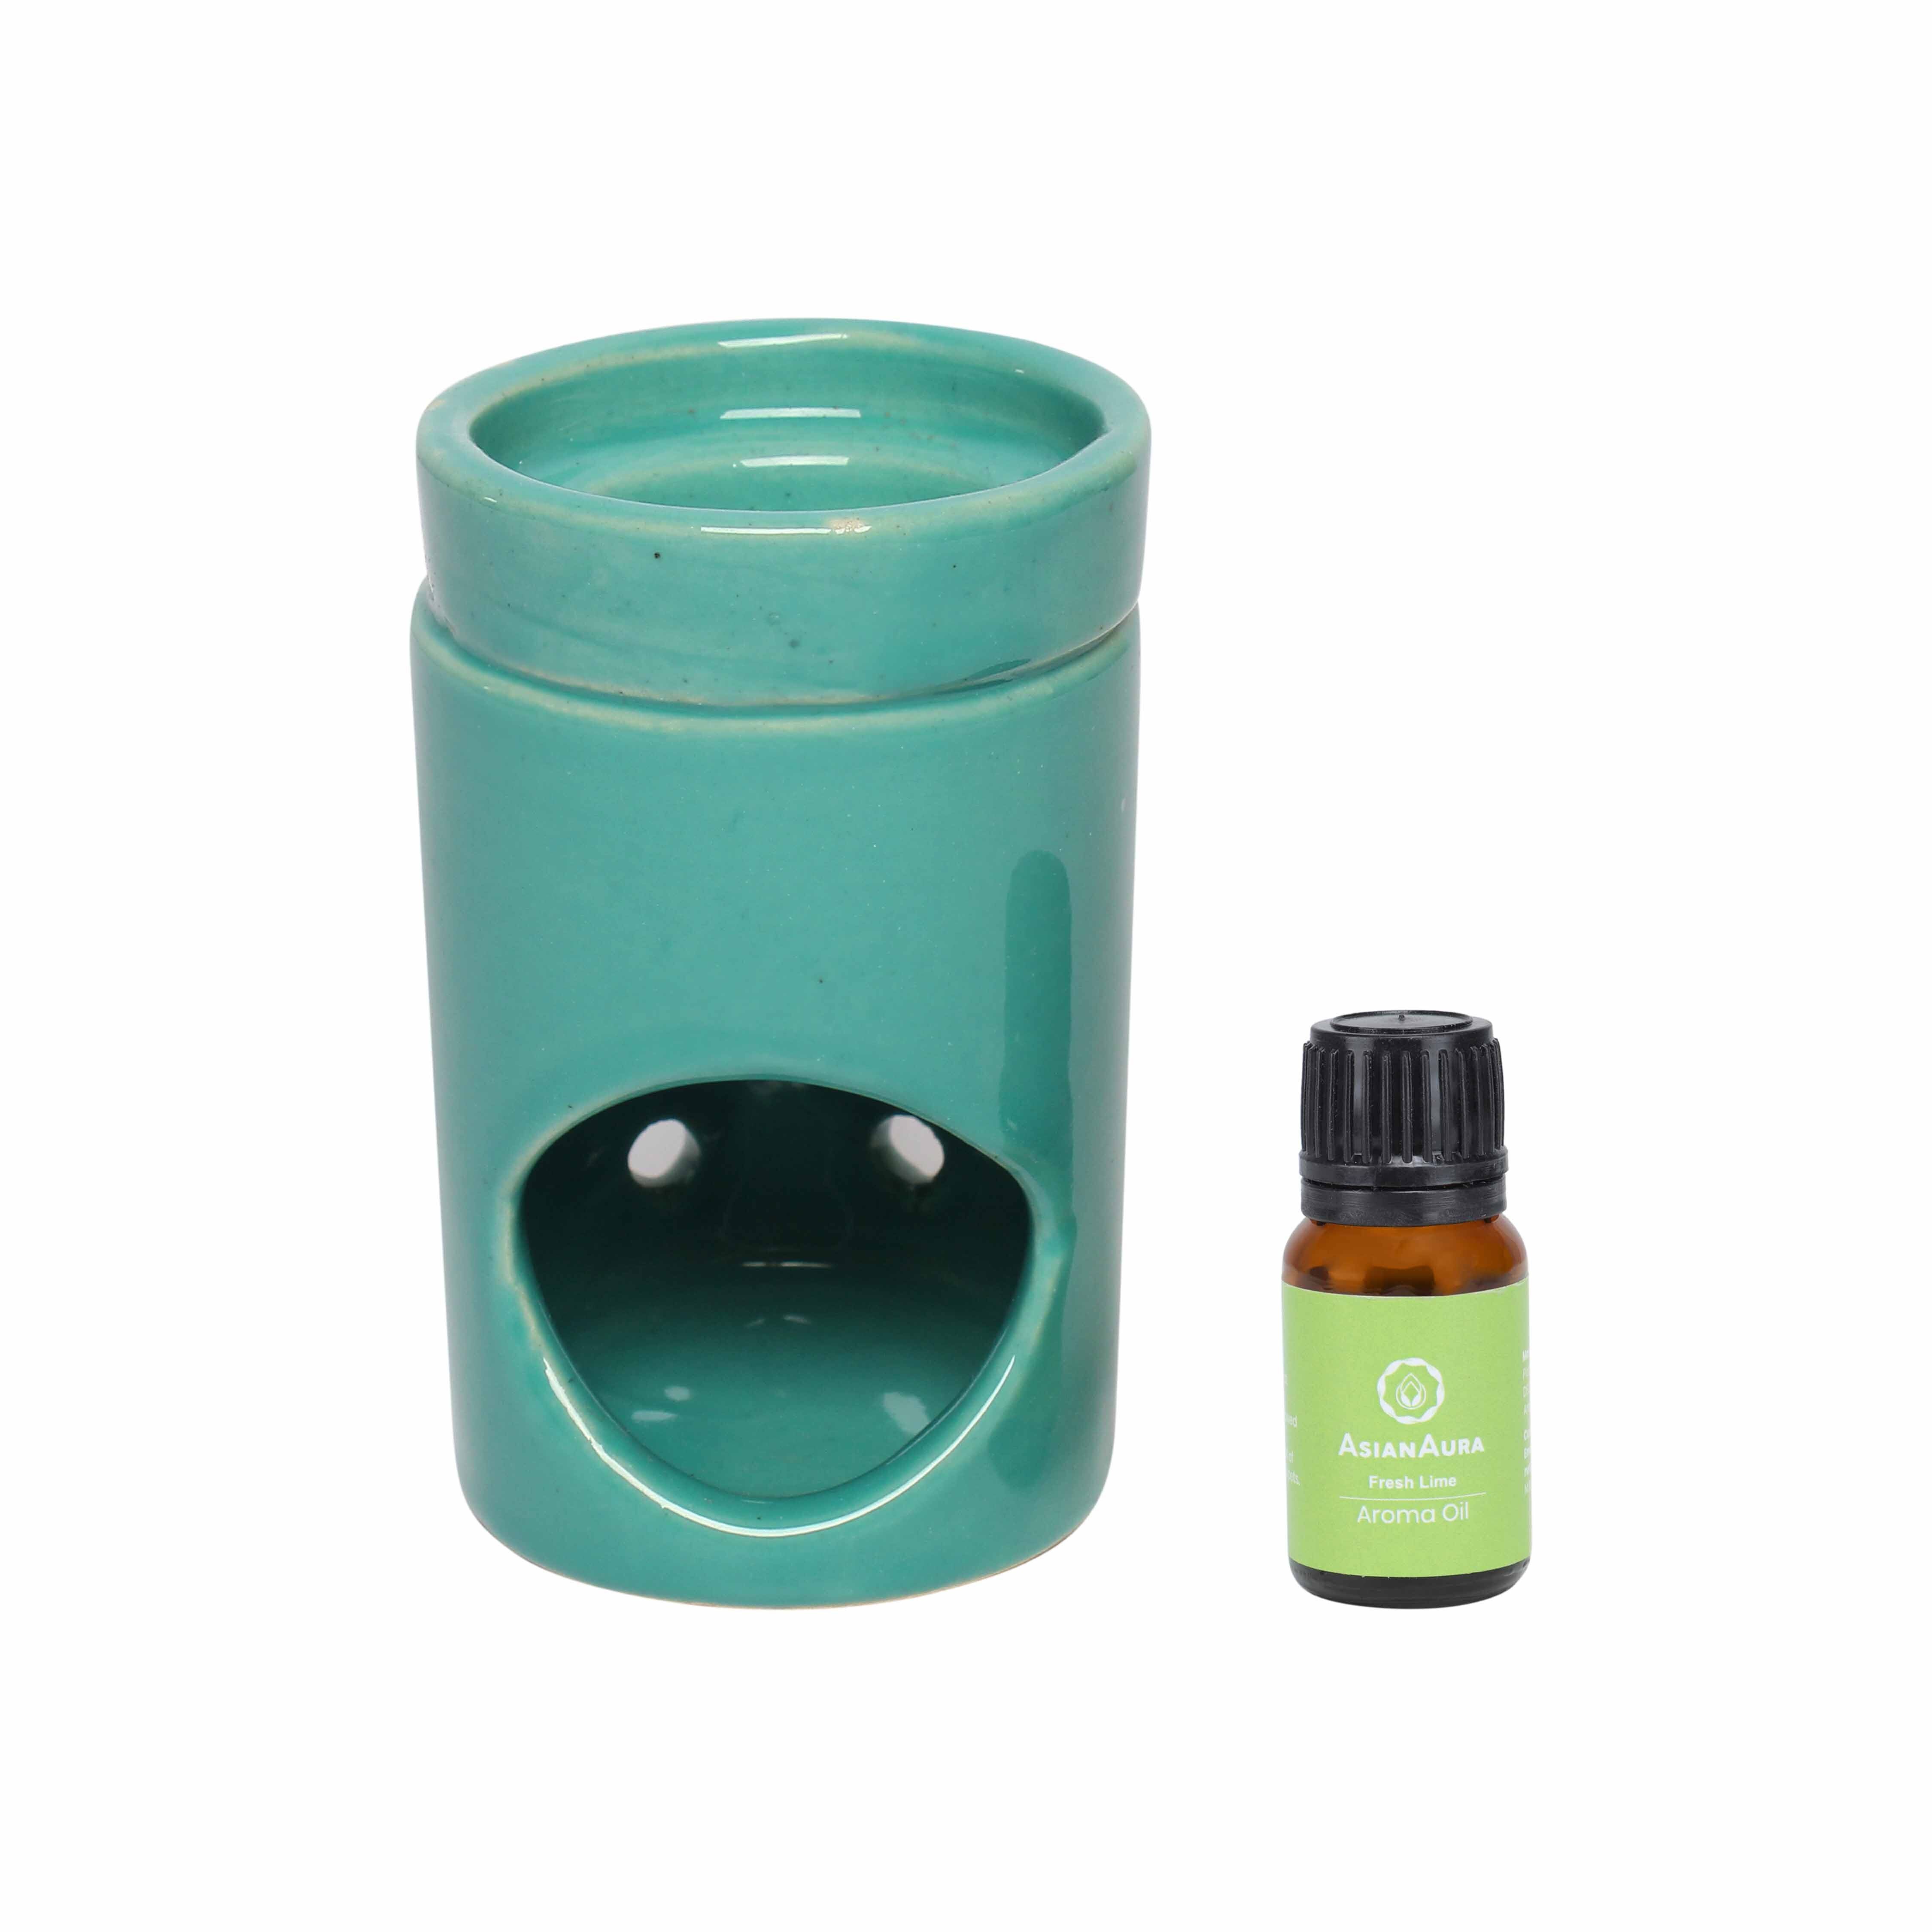 Asian Aura Ceramic Aromatic Oil Diffuser with 2 oil bottles AA-CB-0030-0030